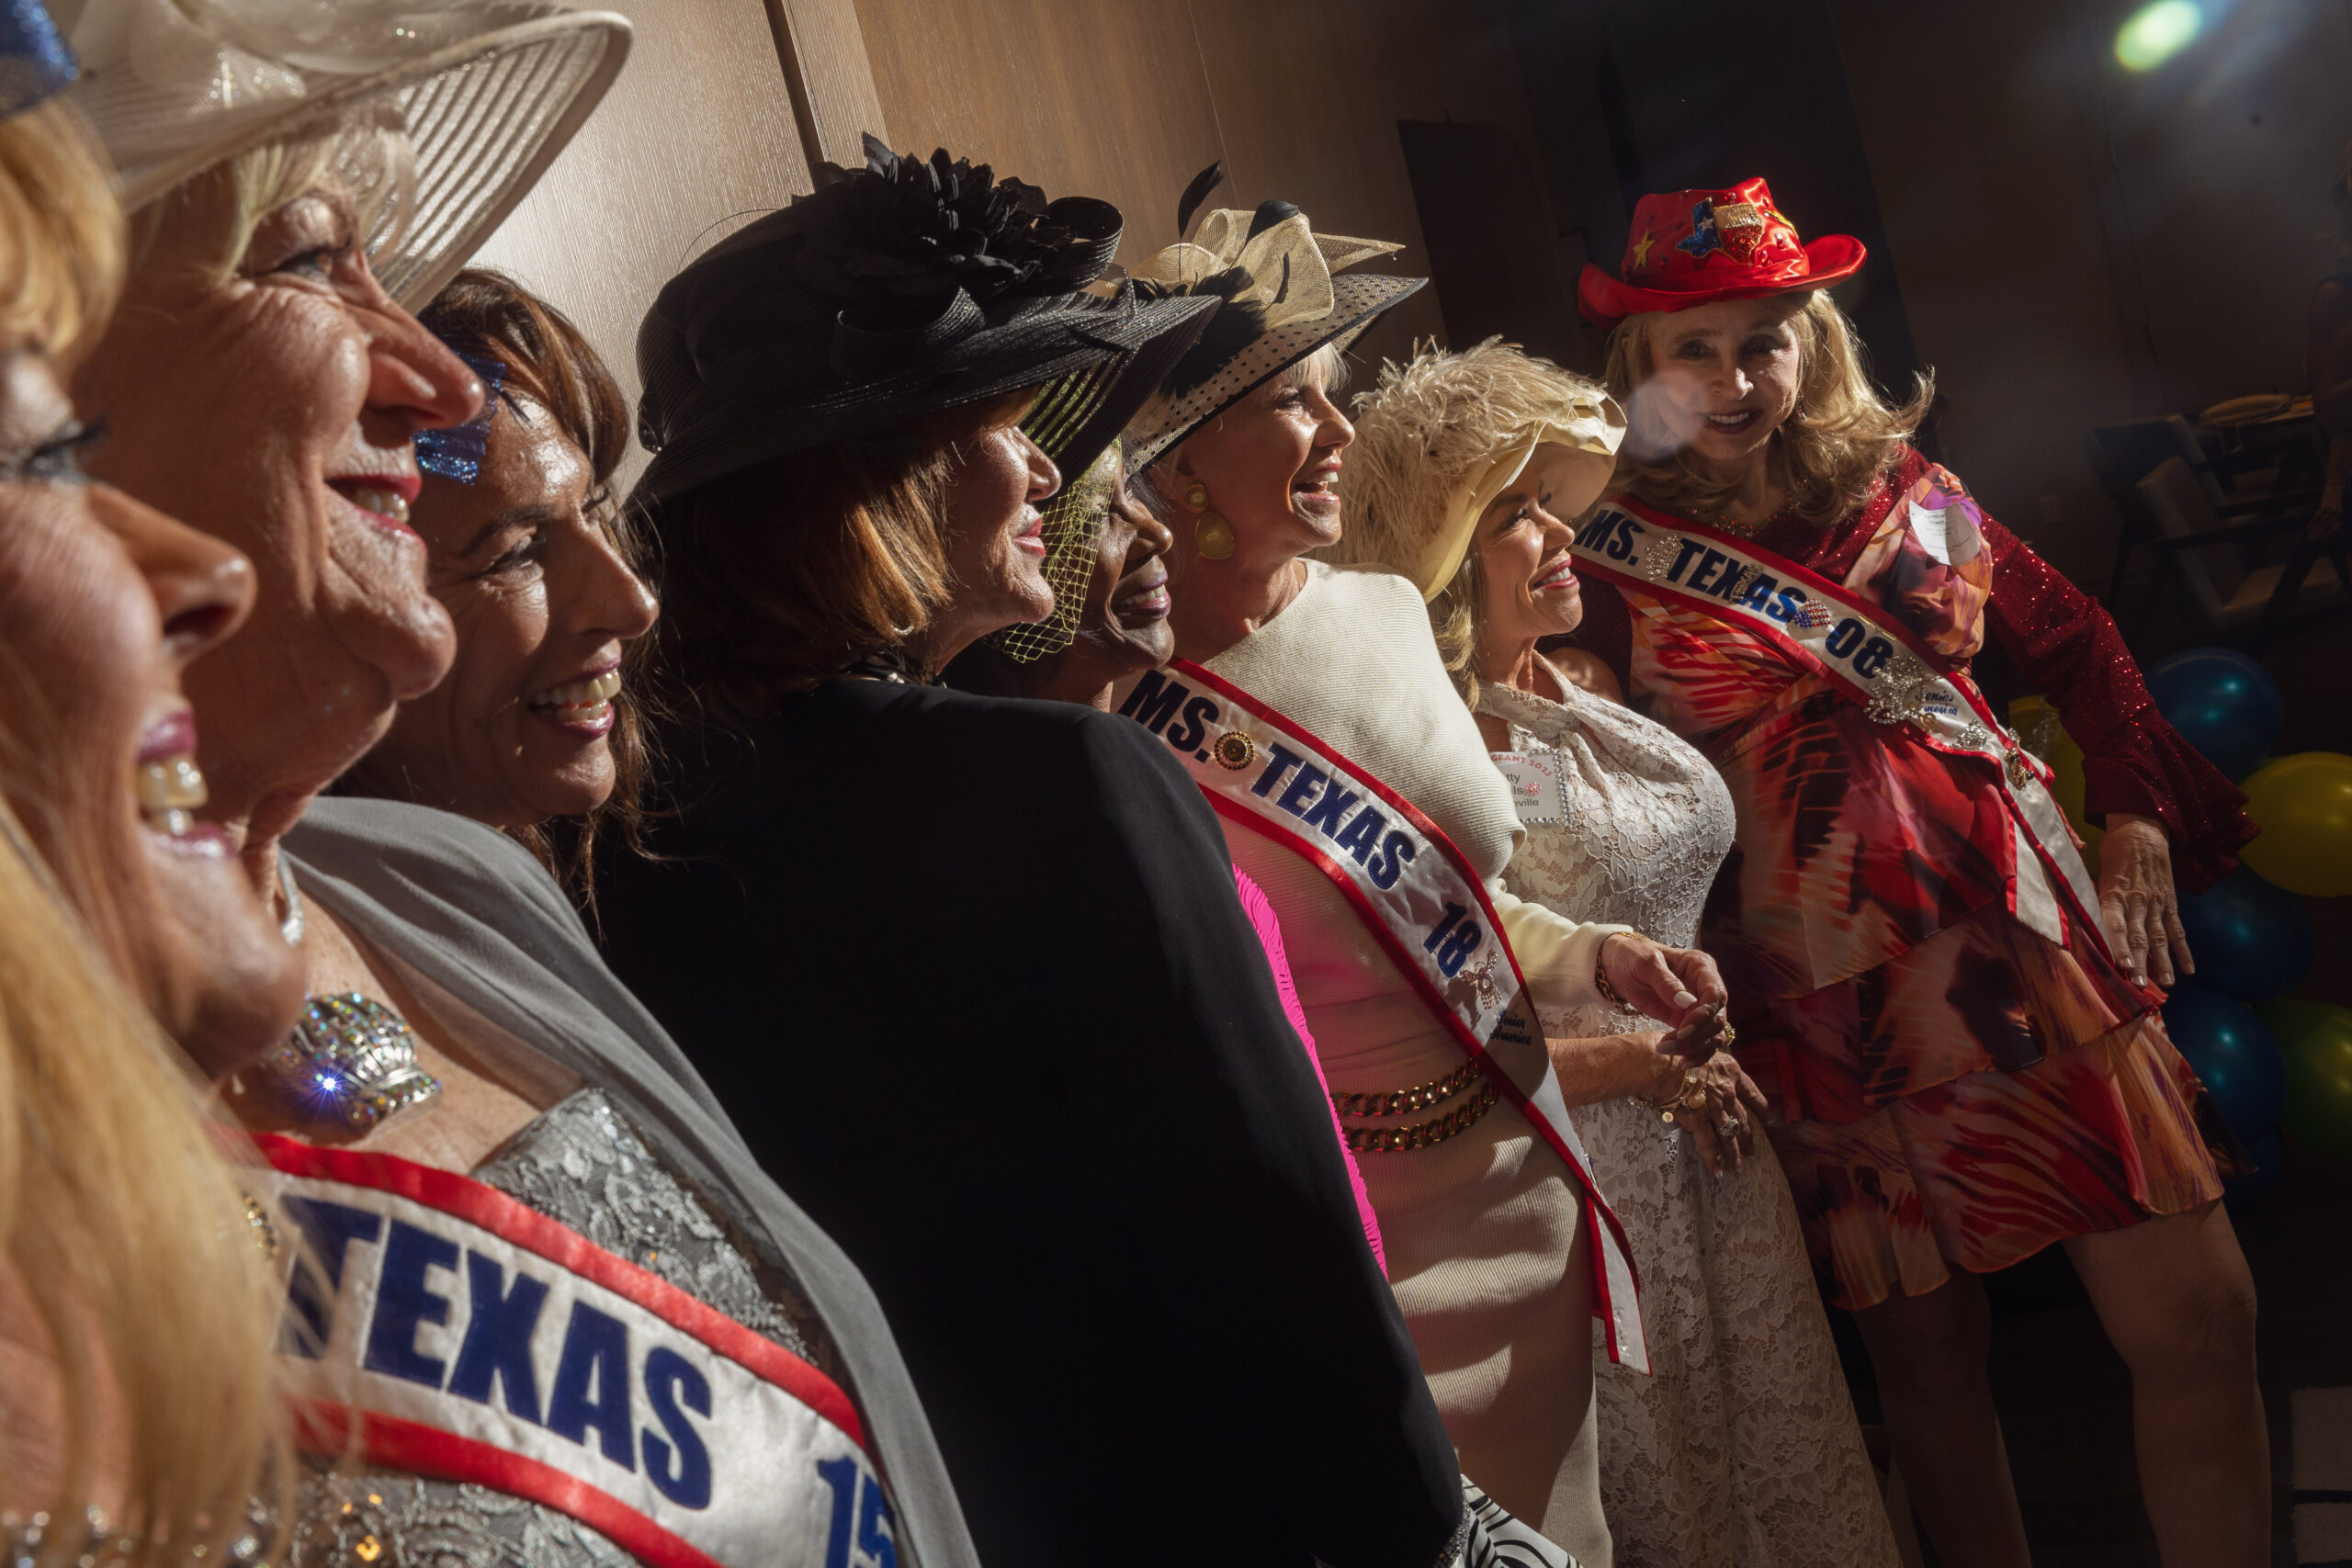 A row of older women in formal evening gowns and sashes announcing the years they won the Ms Texas Senior America pageant.